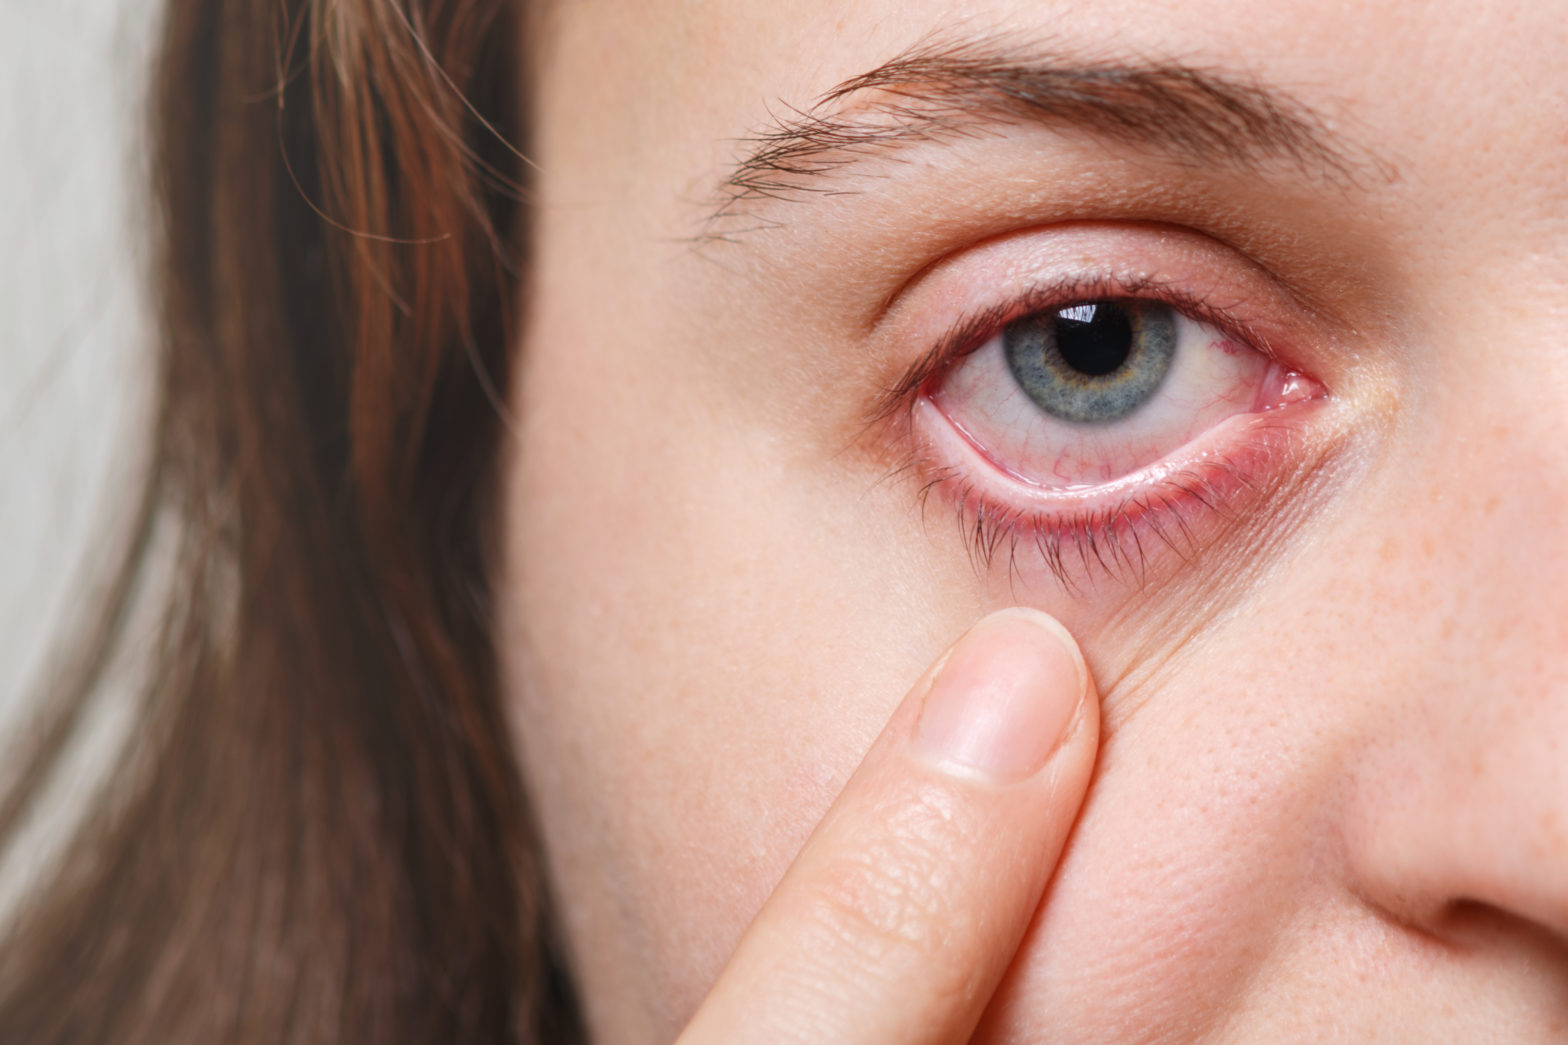 What Is Usually the First Sign of Glaucoma?